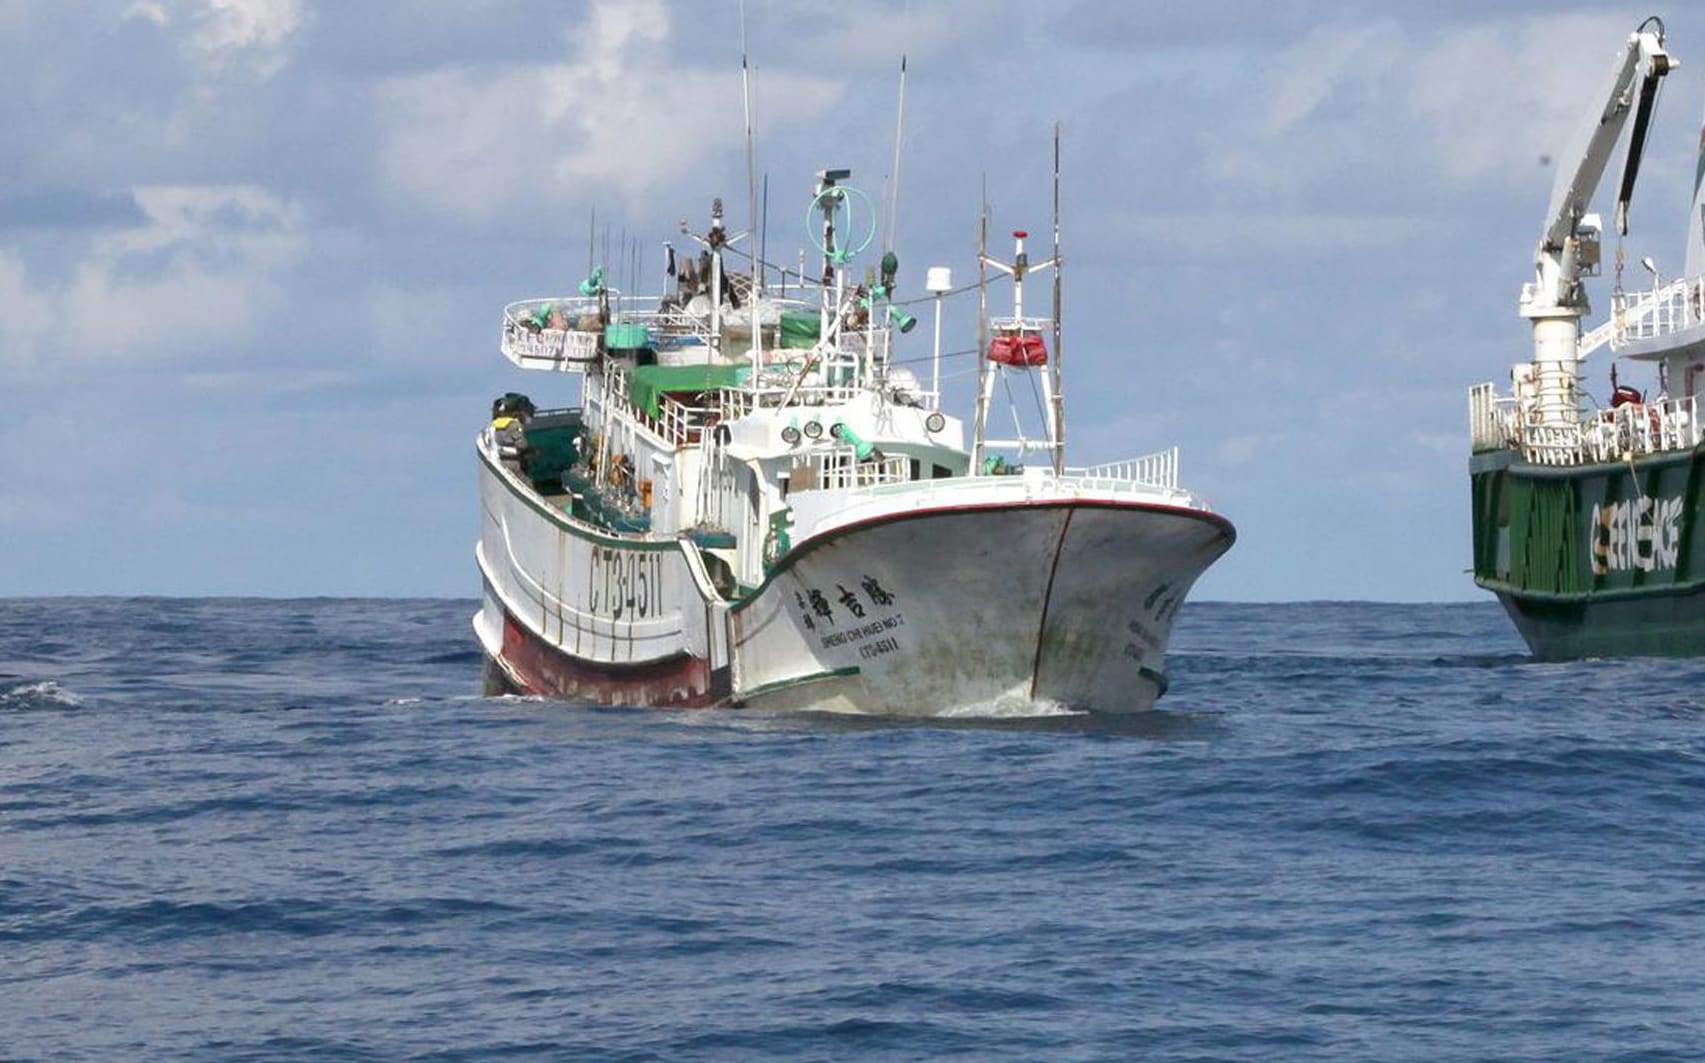 A Palauan law enforcement vessel escorting a Taiwanese long line fishing vessel suspected of illegally shark finning in 2011.